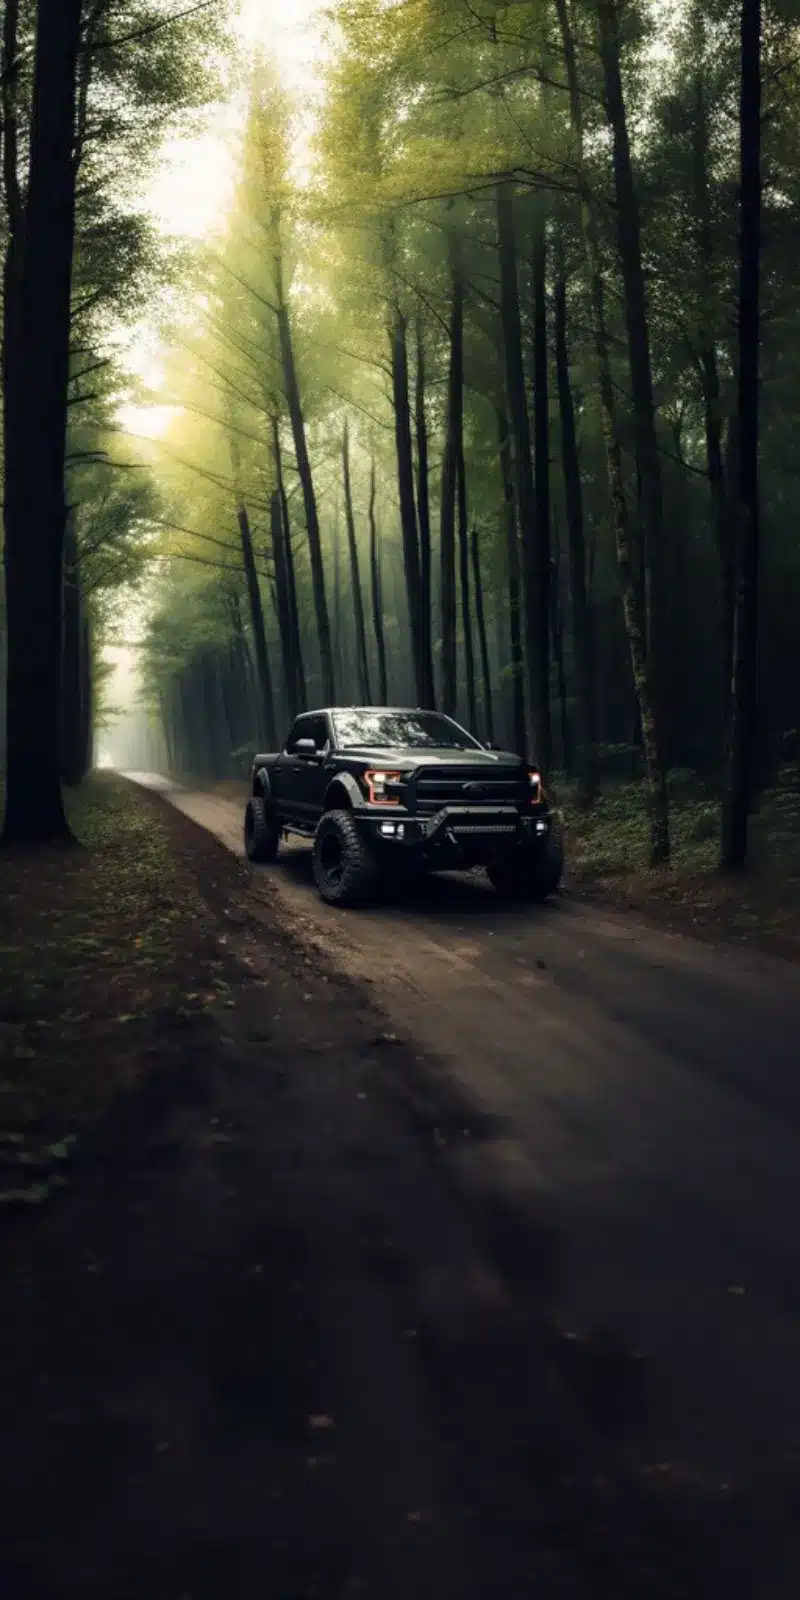 Elevated and customized Ford F-150 in matte military green, adorned with a front light bar, driving along a narrow dirt road weaving through a lush forest.